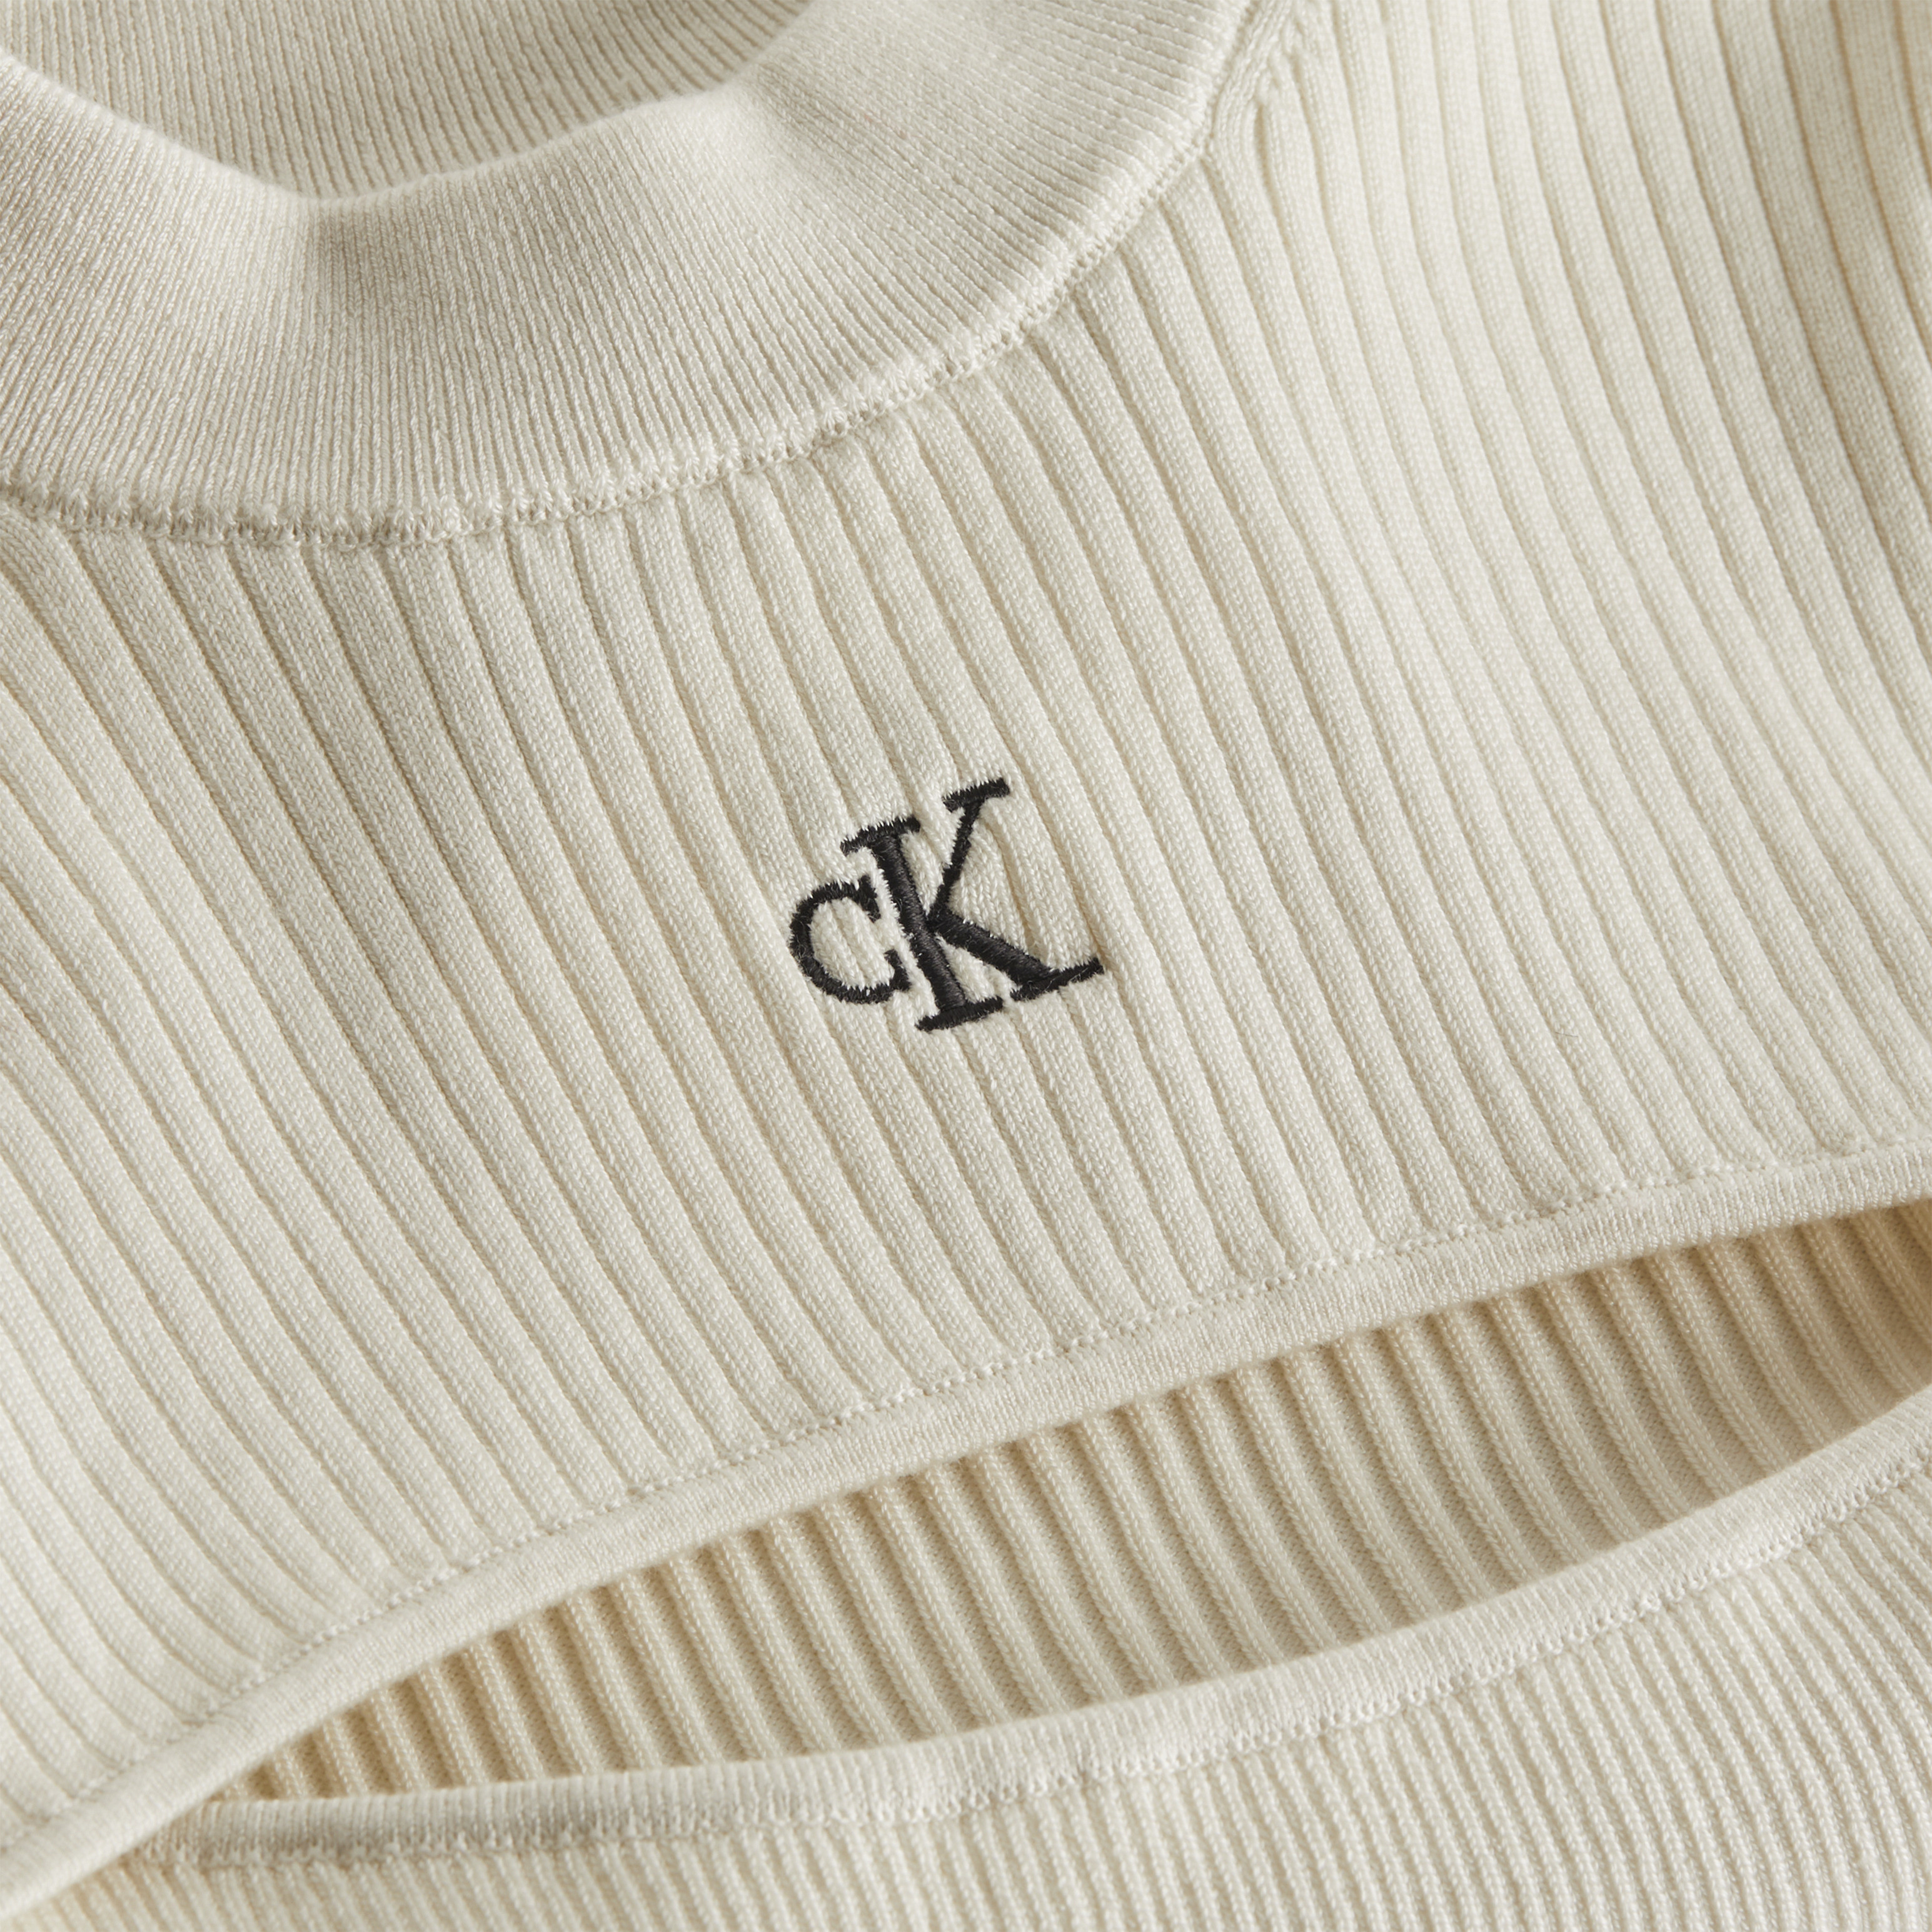 Calvin Klein Jeans - Crop sweater with cut out effect, White Ivory, large image number 2